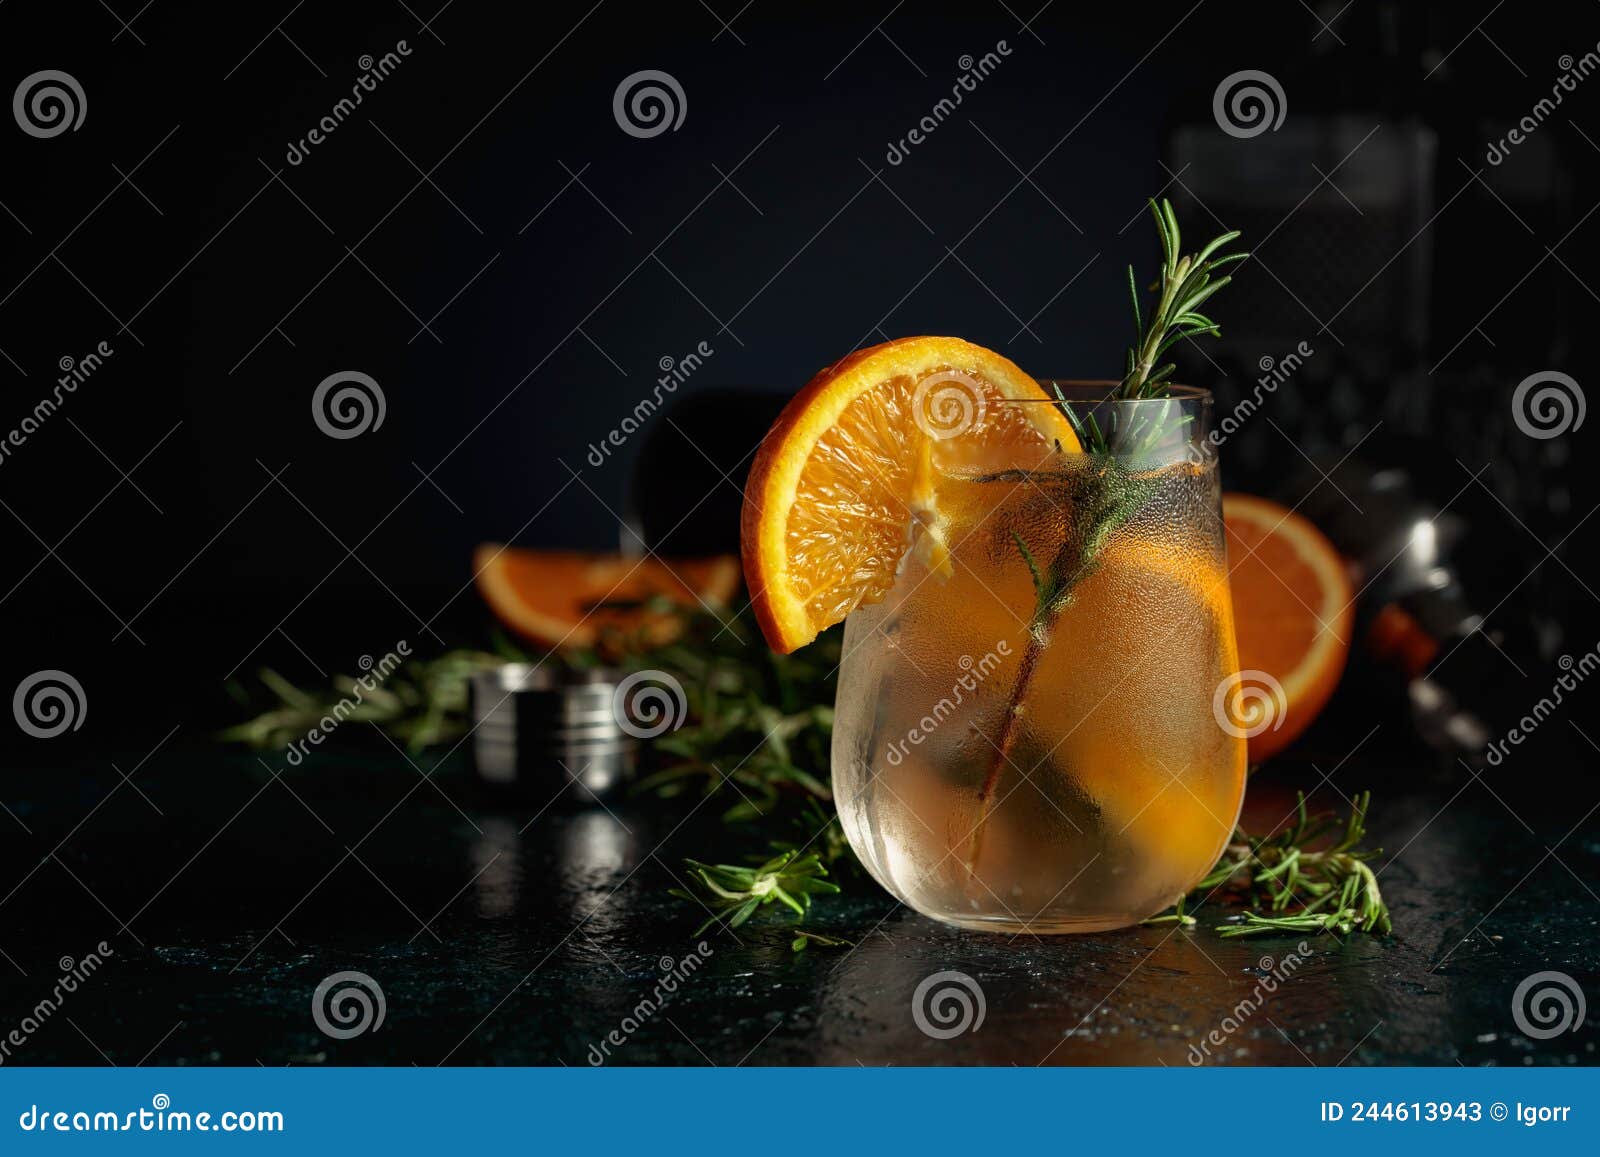 cocktail gin tonic with ice, orange, and rosemary